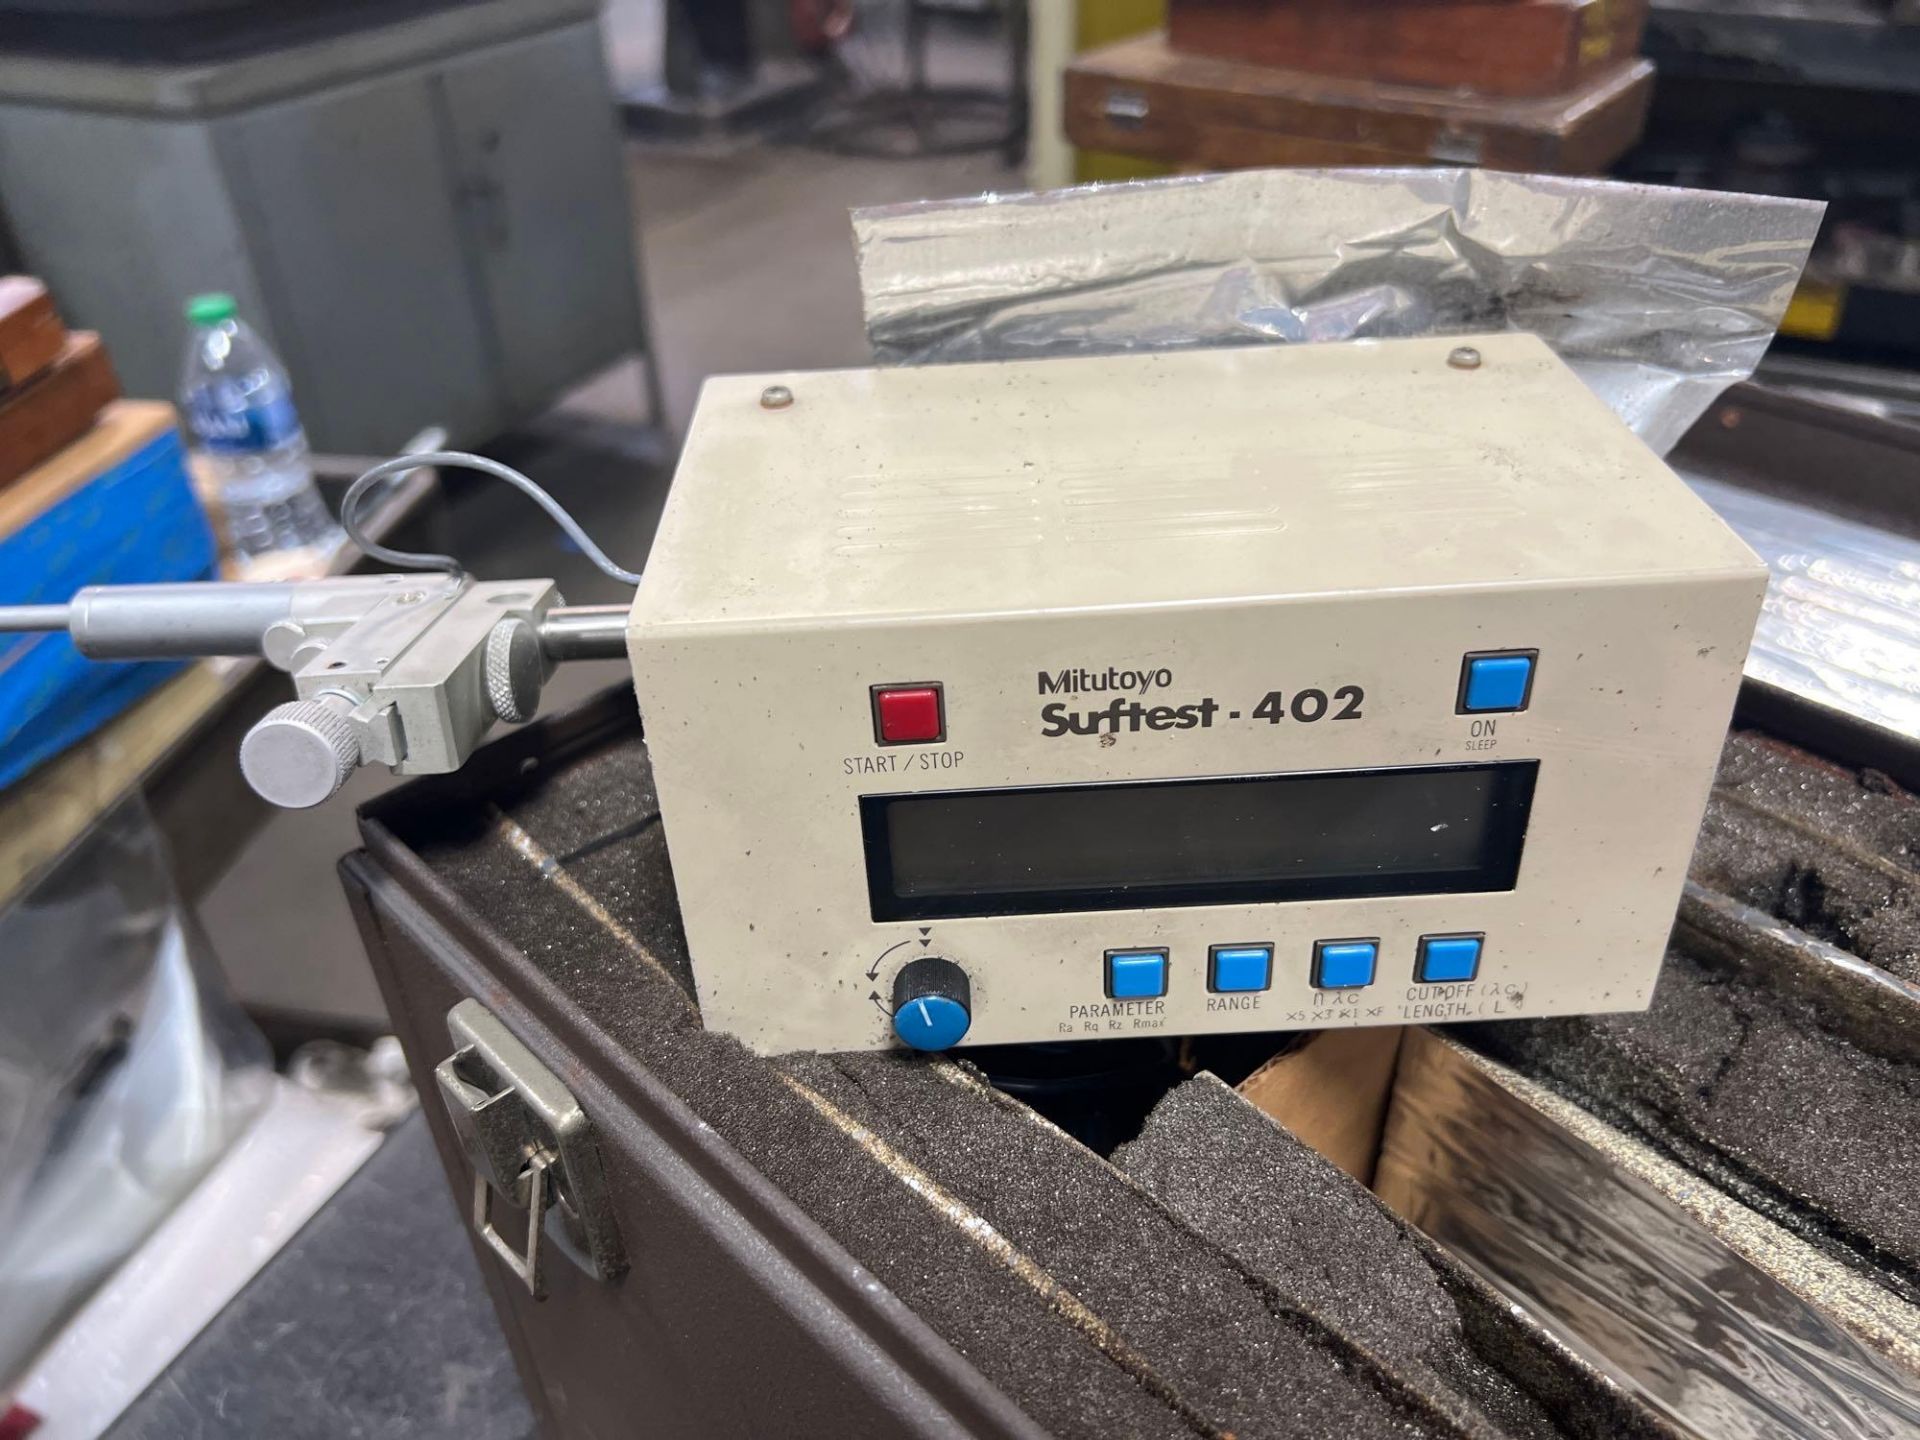 Mitutoyo Surftest 402 Surface Roughness Tester, 178-217-1, 178-350 - Image 5 of 5